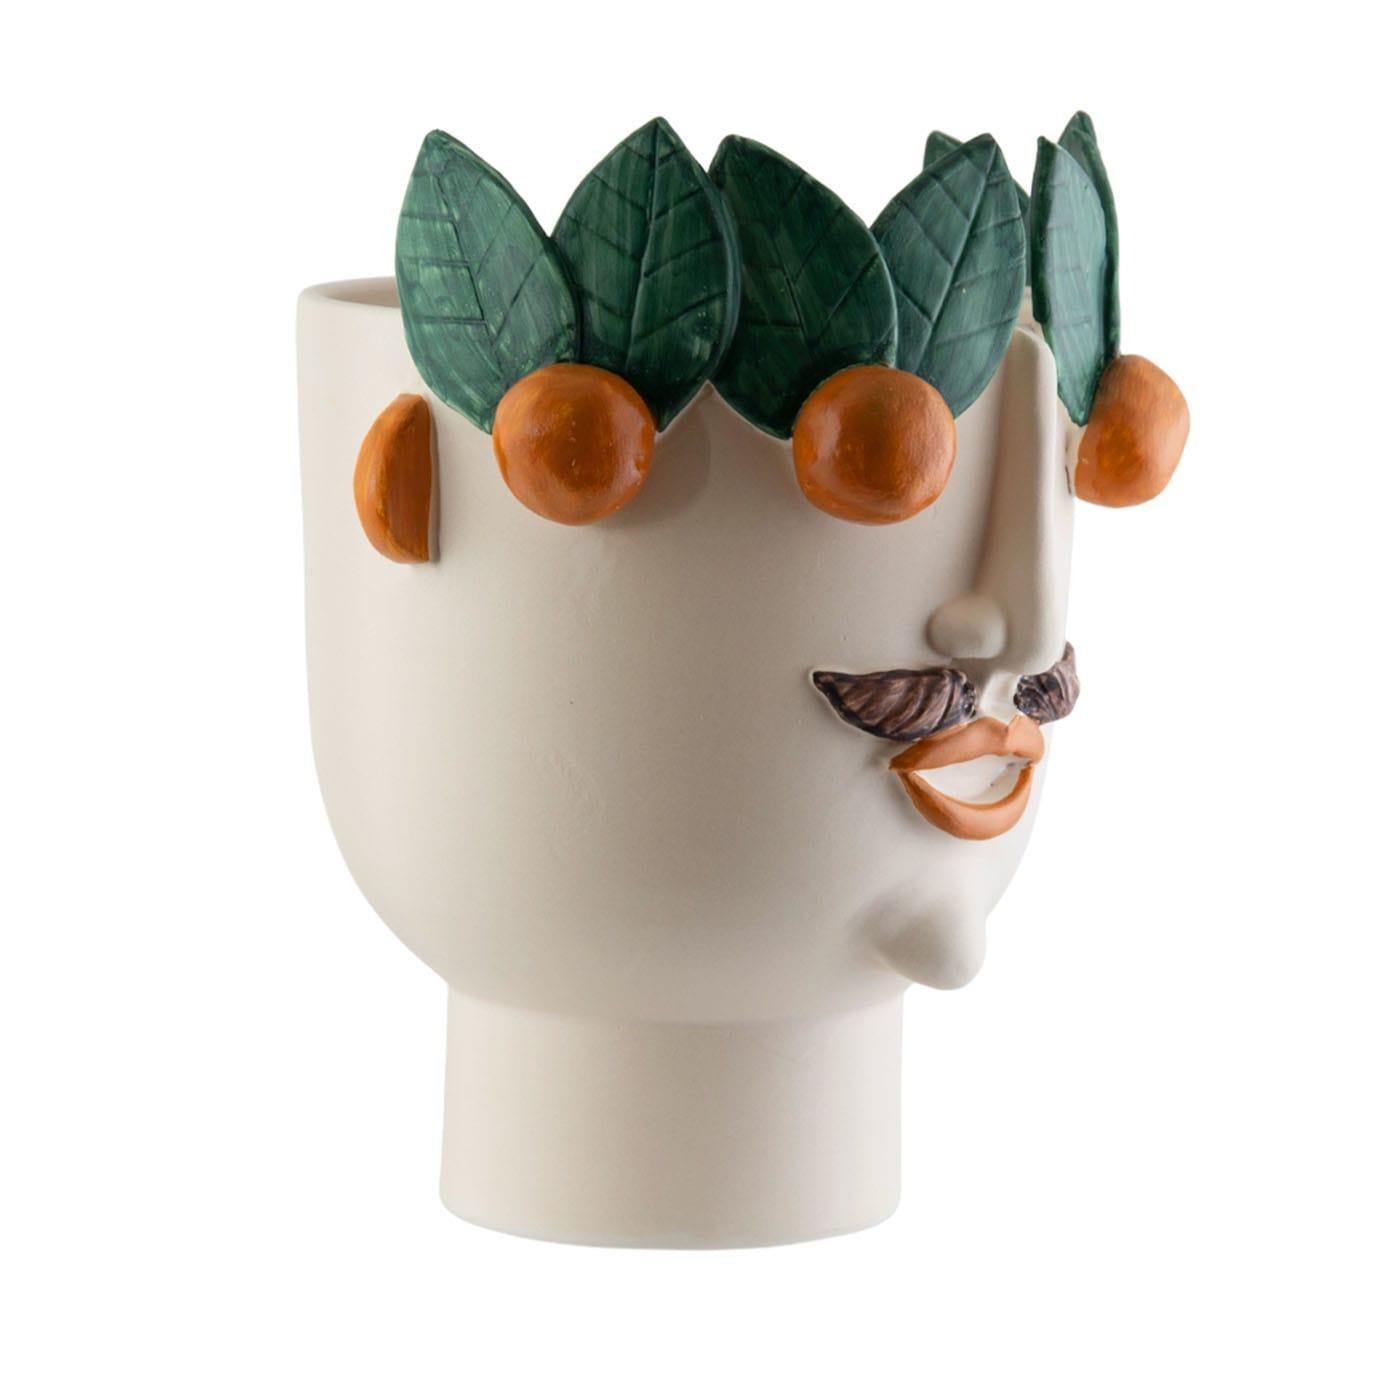 The second fire-fired ceramic head, handmade with face and mandarin reliefs, can be used to hold plants, flowers and sometimes even bottles with ice. Calogero sells mandarins at the Palermo market, a serious and old-fashioned man, a hard worker!